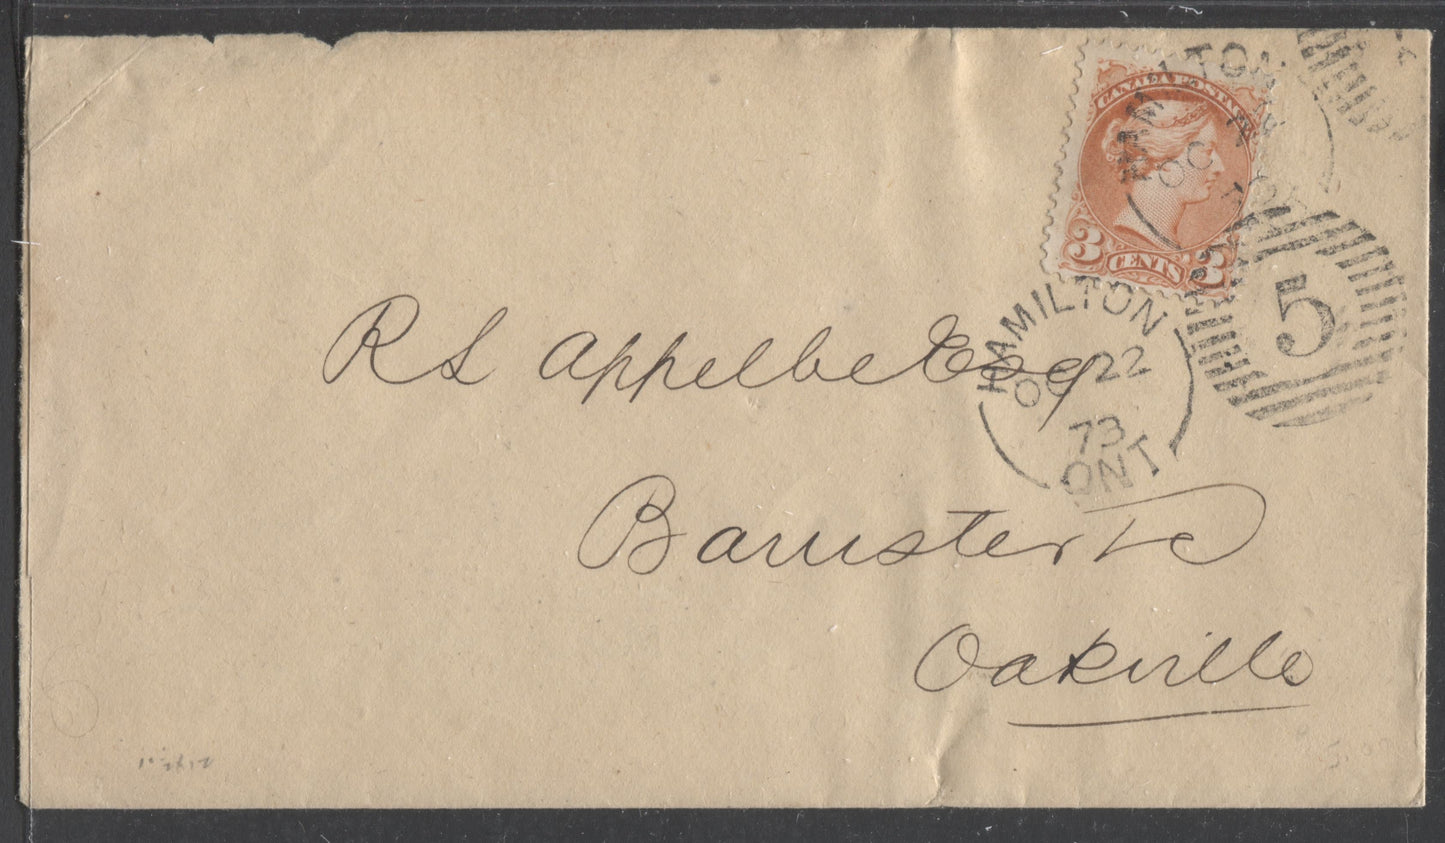 Lot 148 Canada #37iii 3c Orange Red Queen Victoria, 1870-1897 Small Queen Issue, Single Usage on a Cover From Hamilton to Oakville, ON Montreal, 11.75 x 12, Stout Wove, October 22, 1873 Hamilton Duplex Cancel